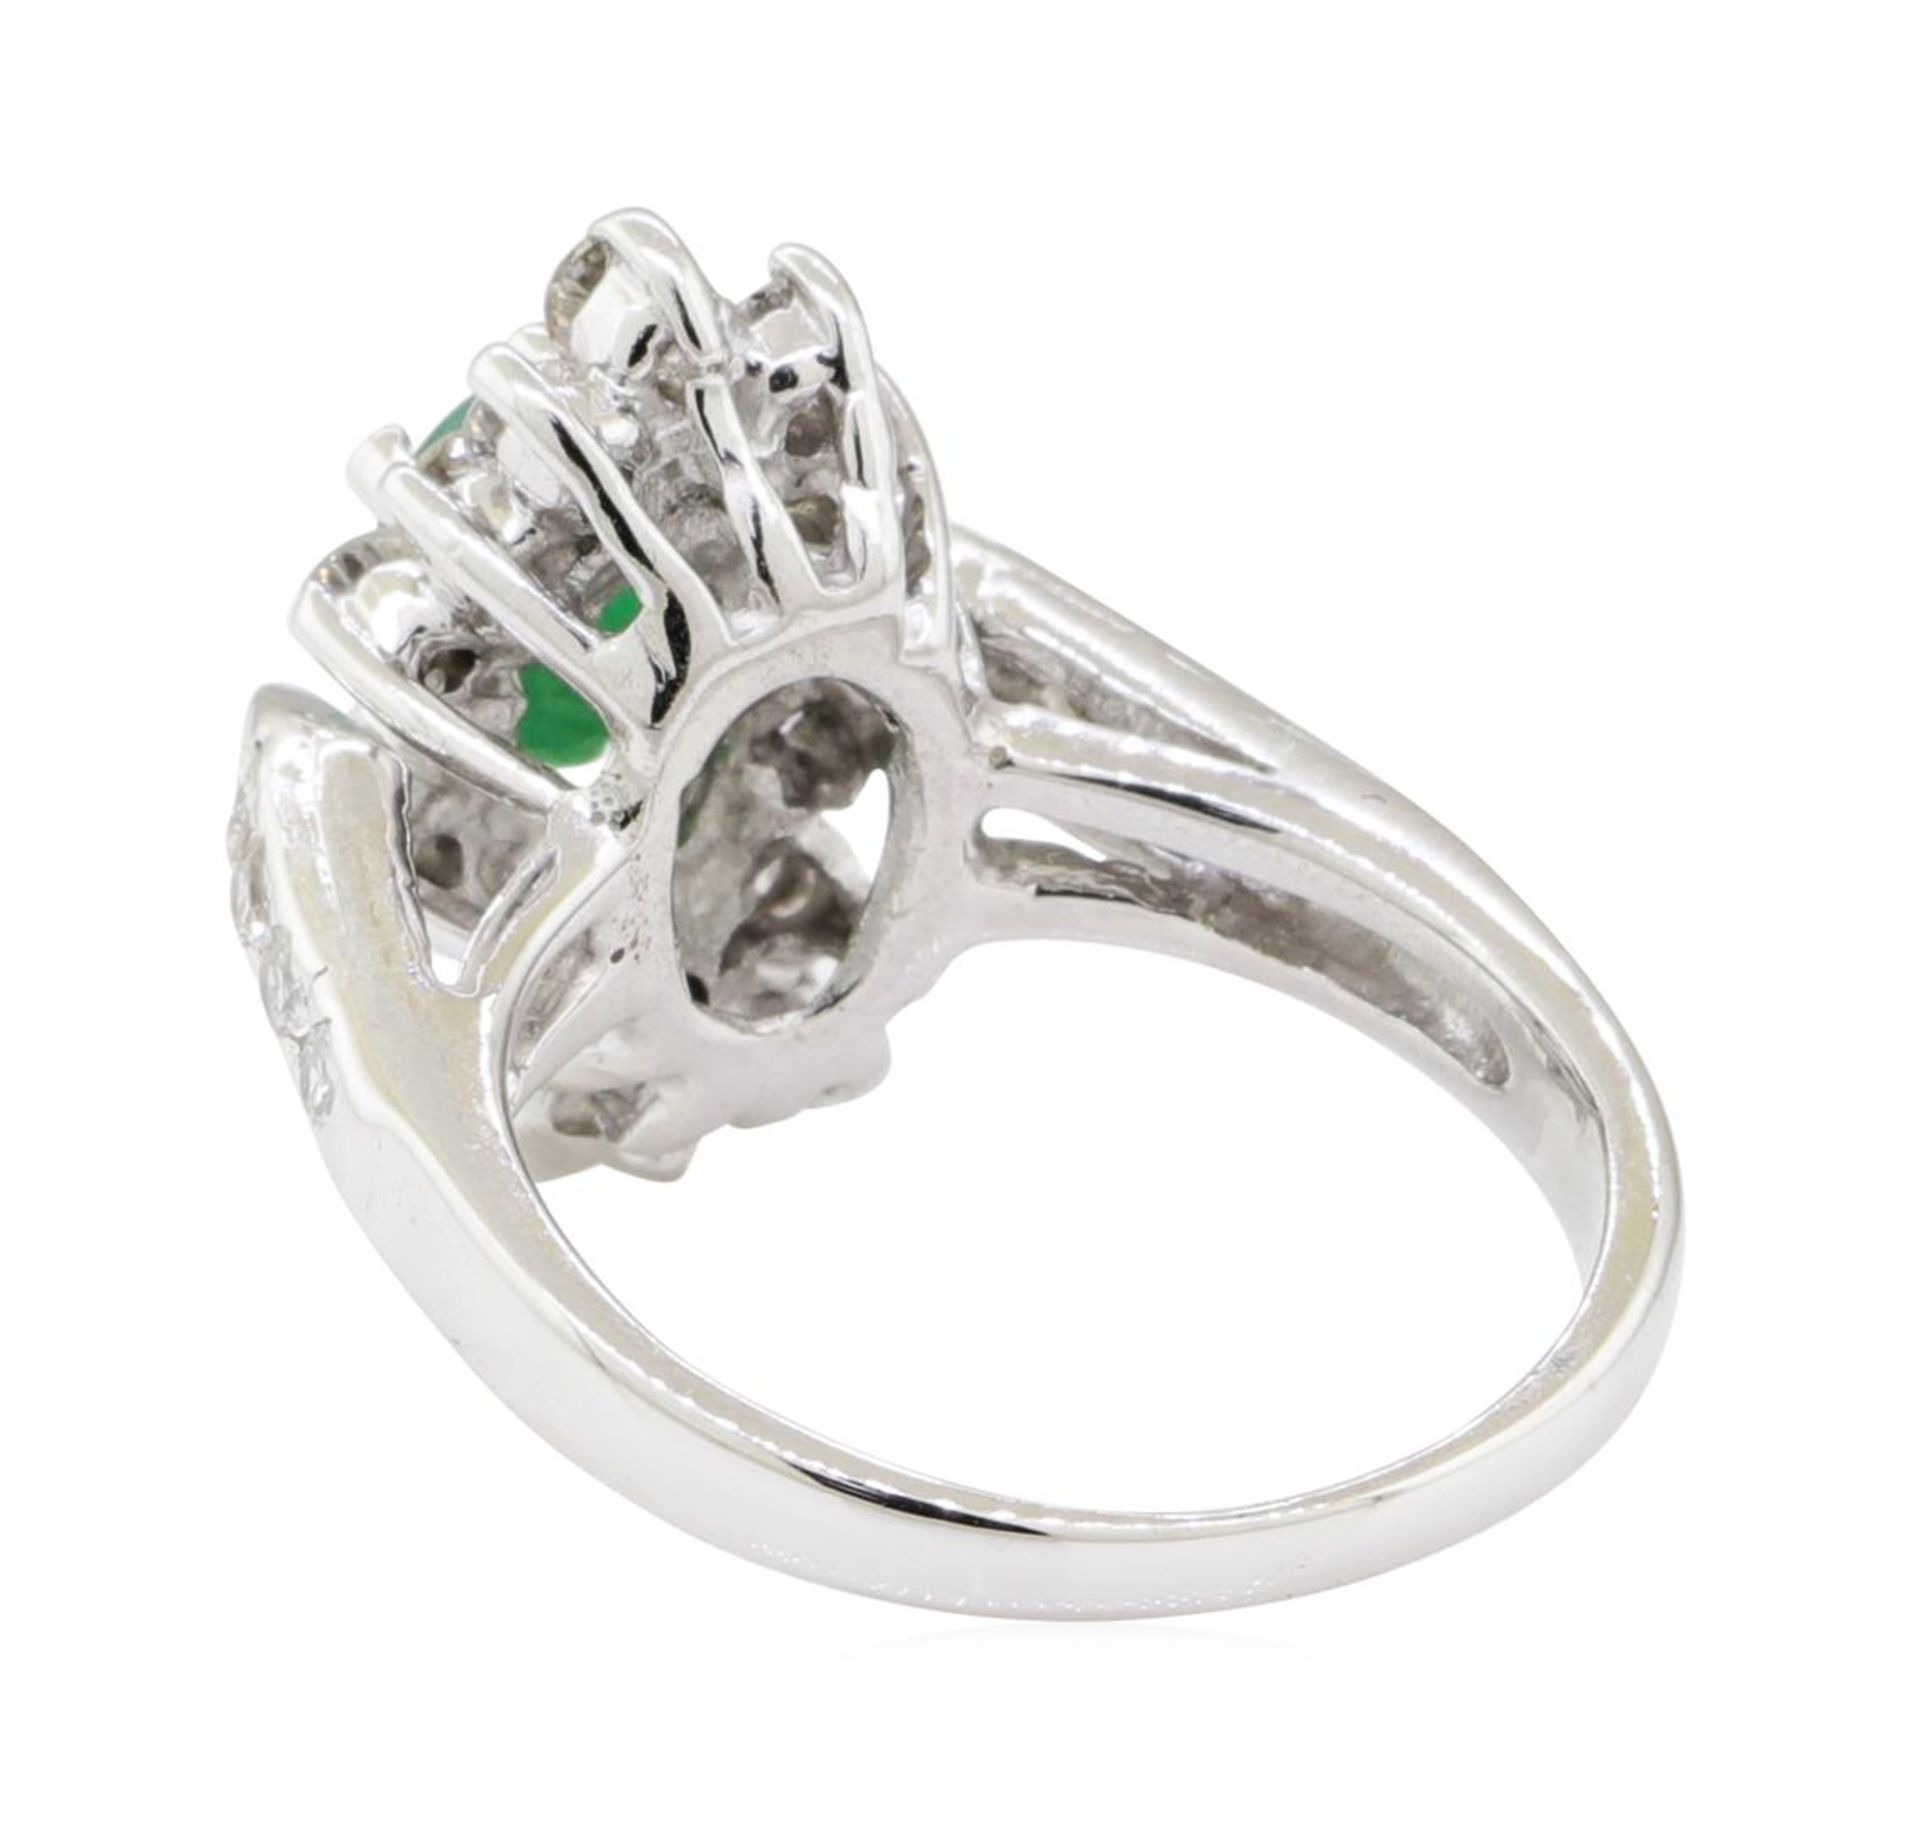 1.67 ctw Emerald and Diamond Ring - 14KT White Gold - Image 3 of 5